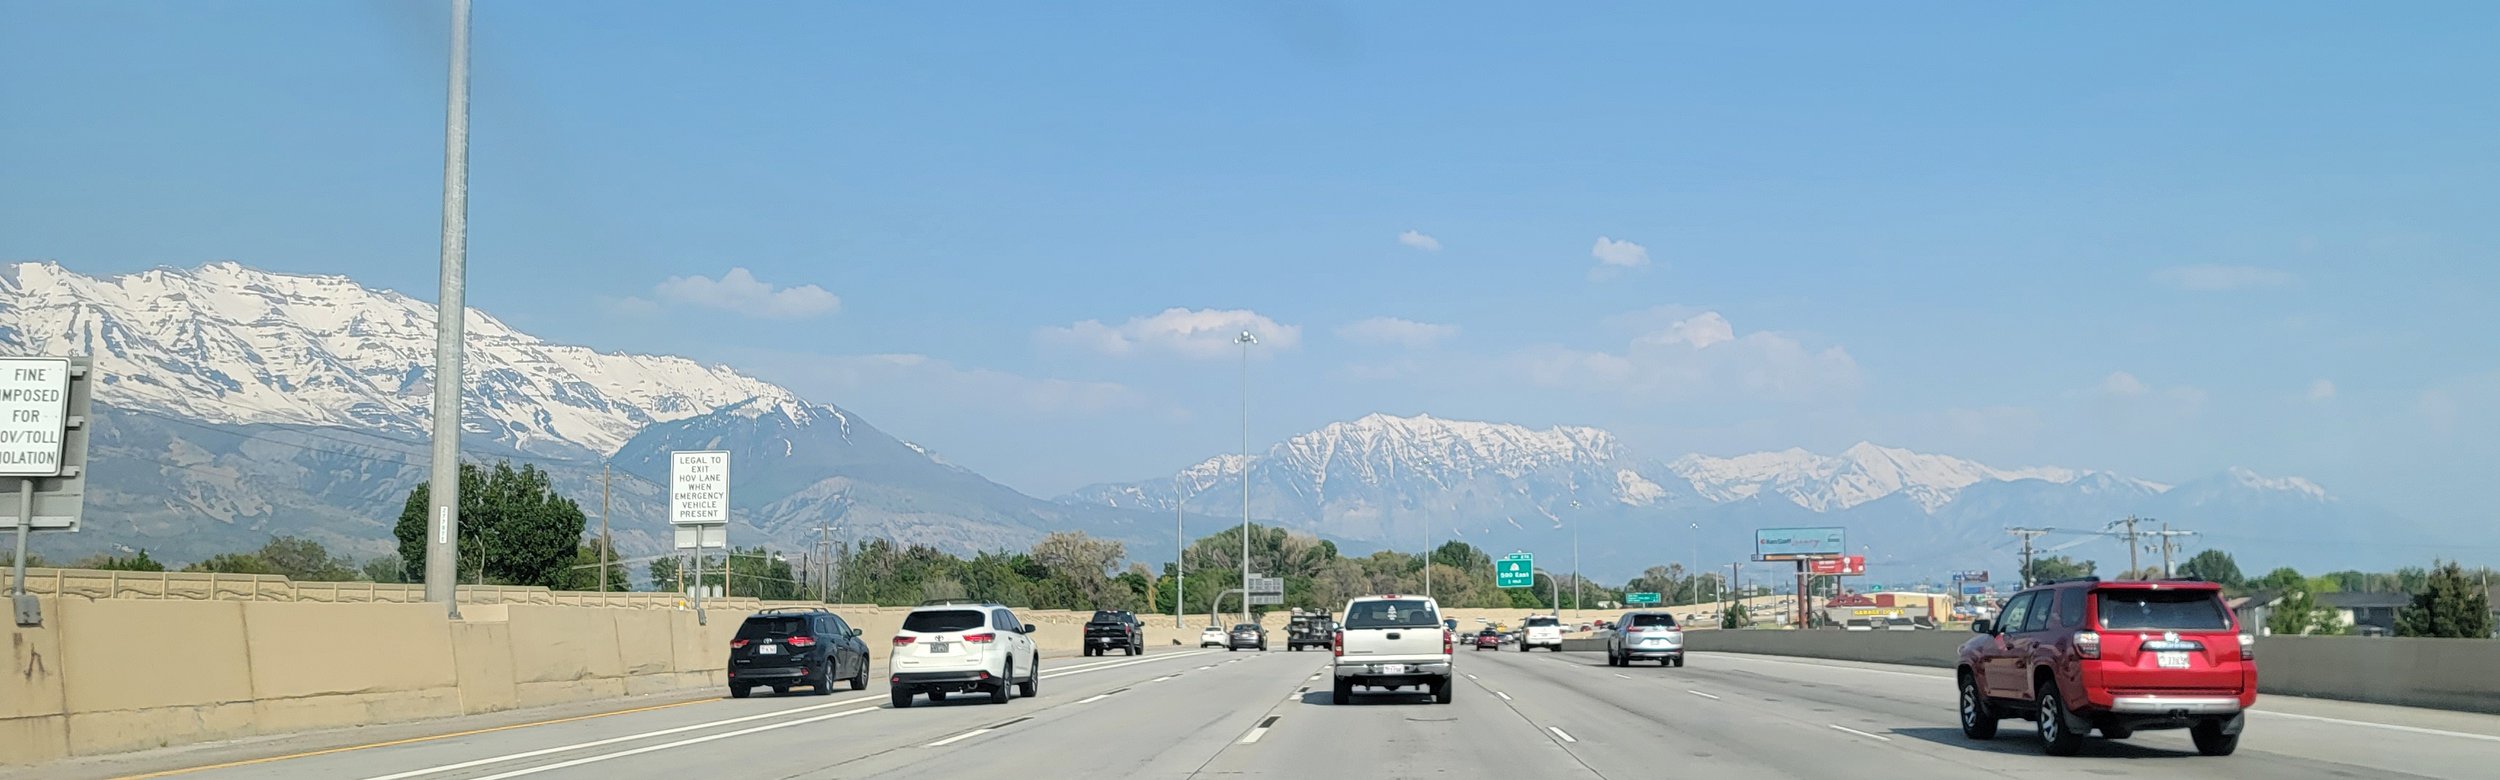 There's a huge clump of cities between the Salt Lake and these mountains. It's pretty epic.